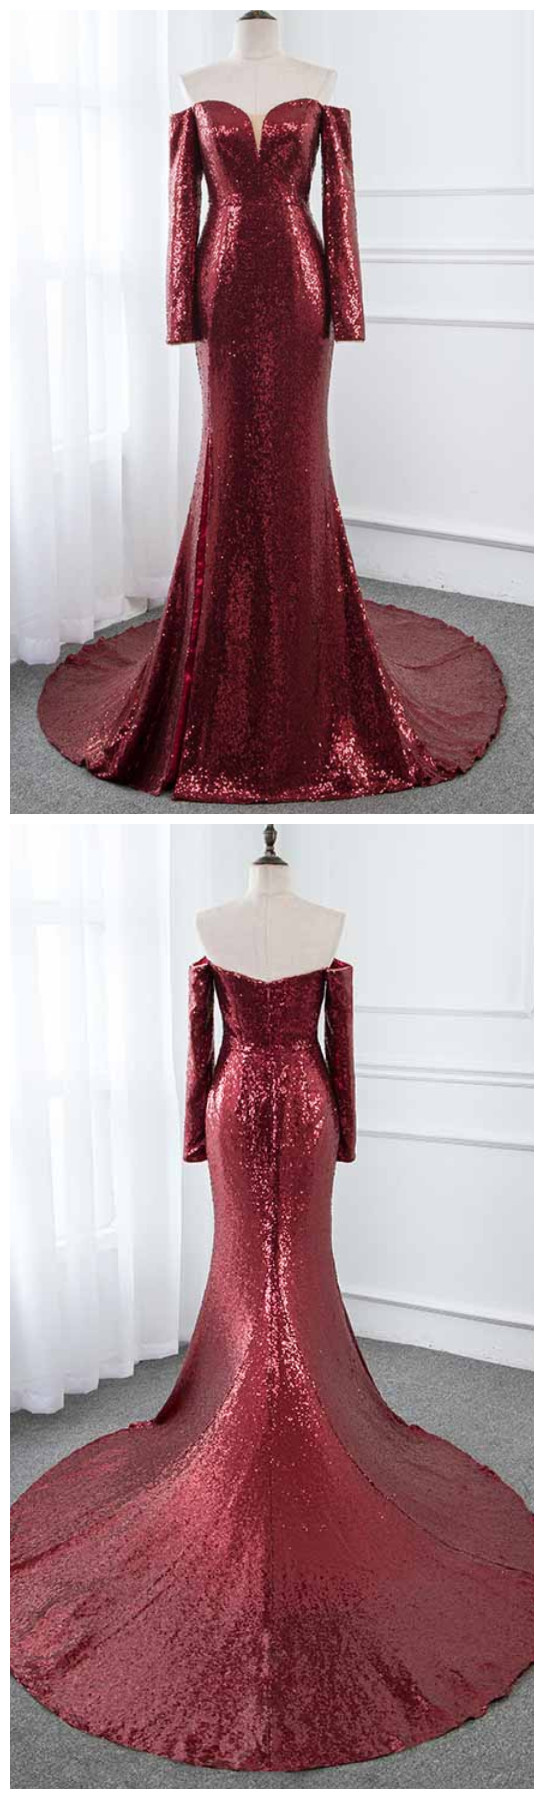 Ruby Outfit Burgundy Long Prom Dresses Off The Shoulder Full Sleeve Formal Evening Gown Dress